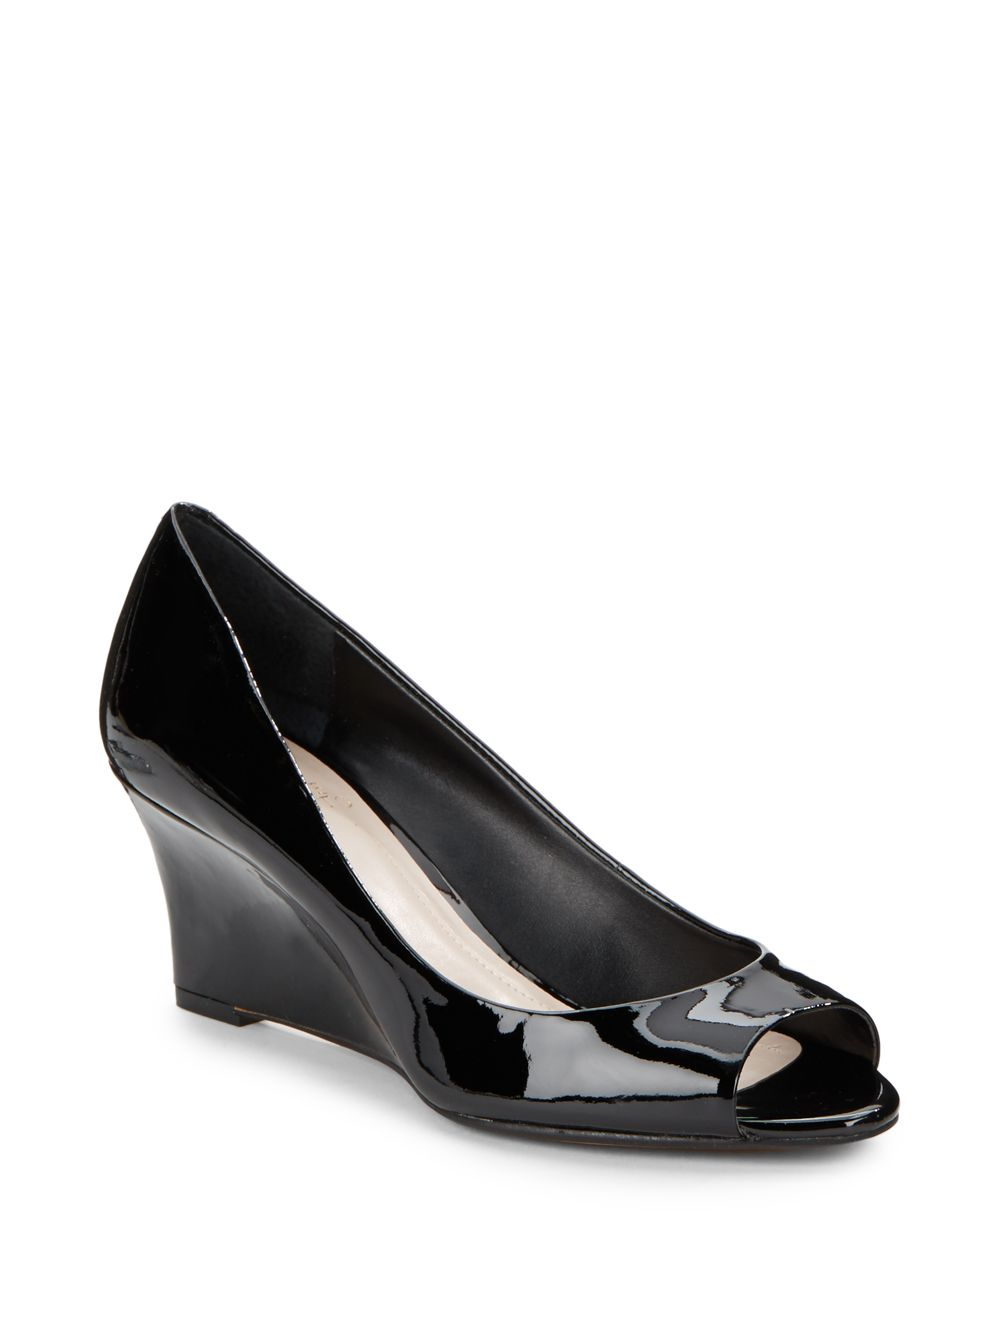 Vince Camuto Sassie Patent Leather Peep-toe Wedges in Black - Lyst